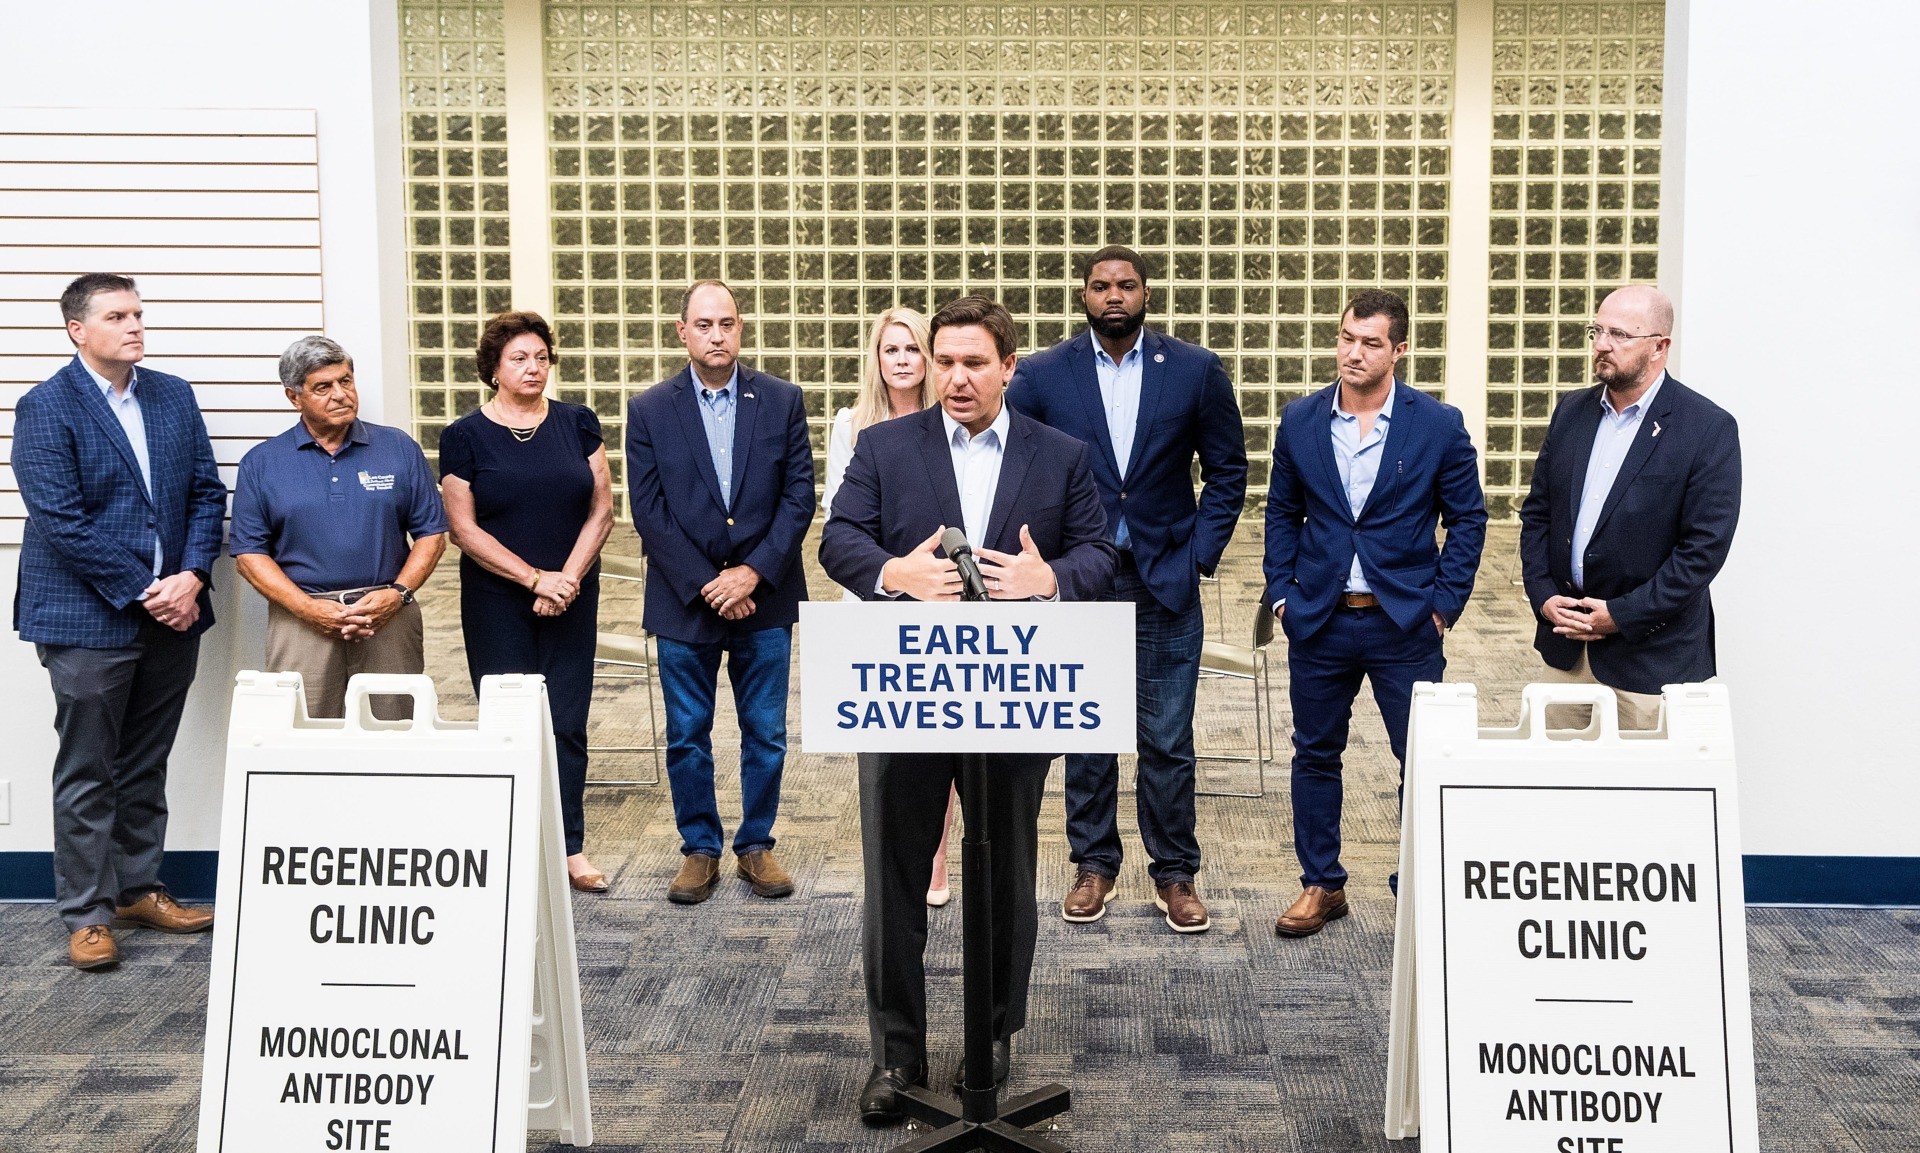 Florida Gov. Ron DeSantis held a press conference Friday, August 20, 2021 announcing a monoclonal antibody site at the old Bonita Springs Library. It is used to treat patients with COVID-19